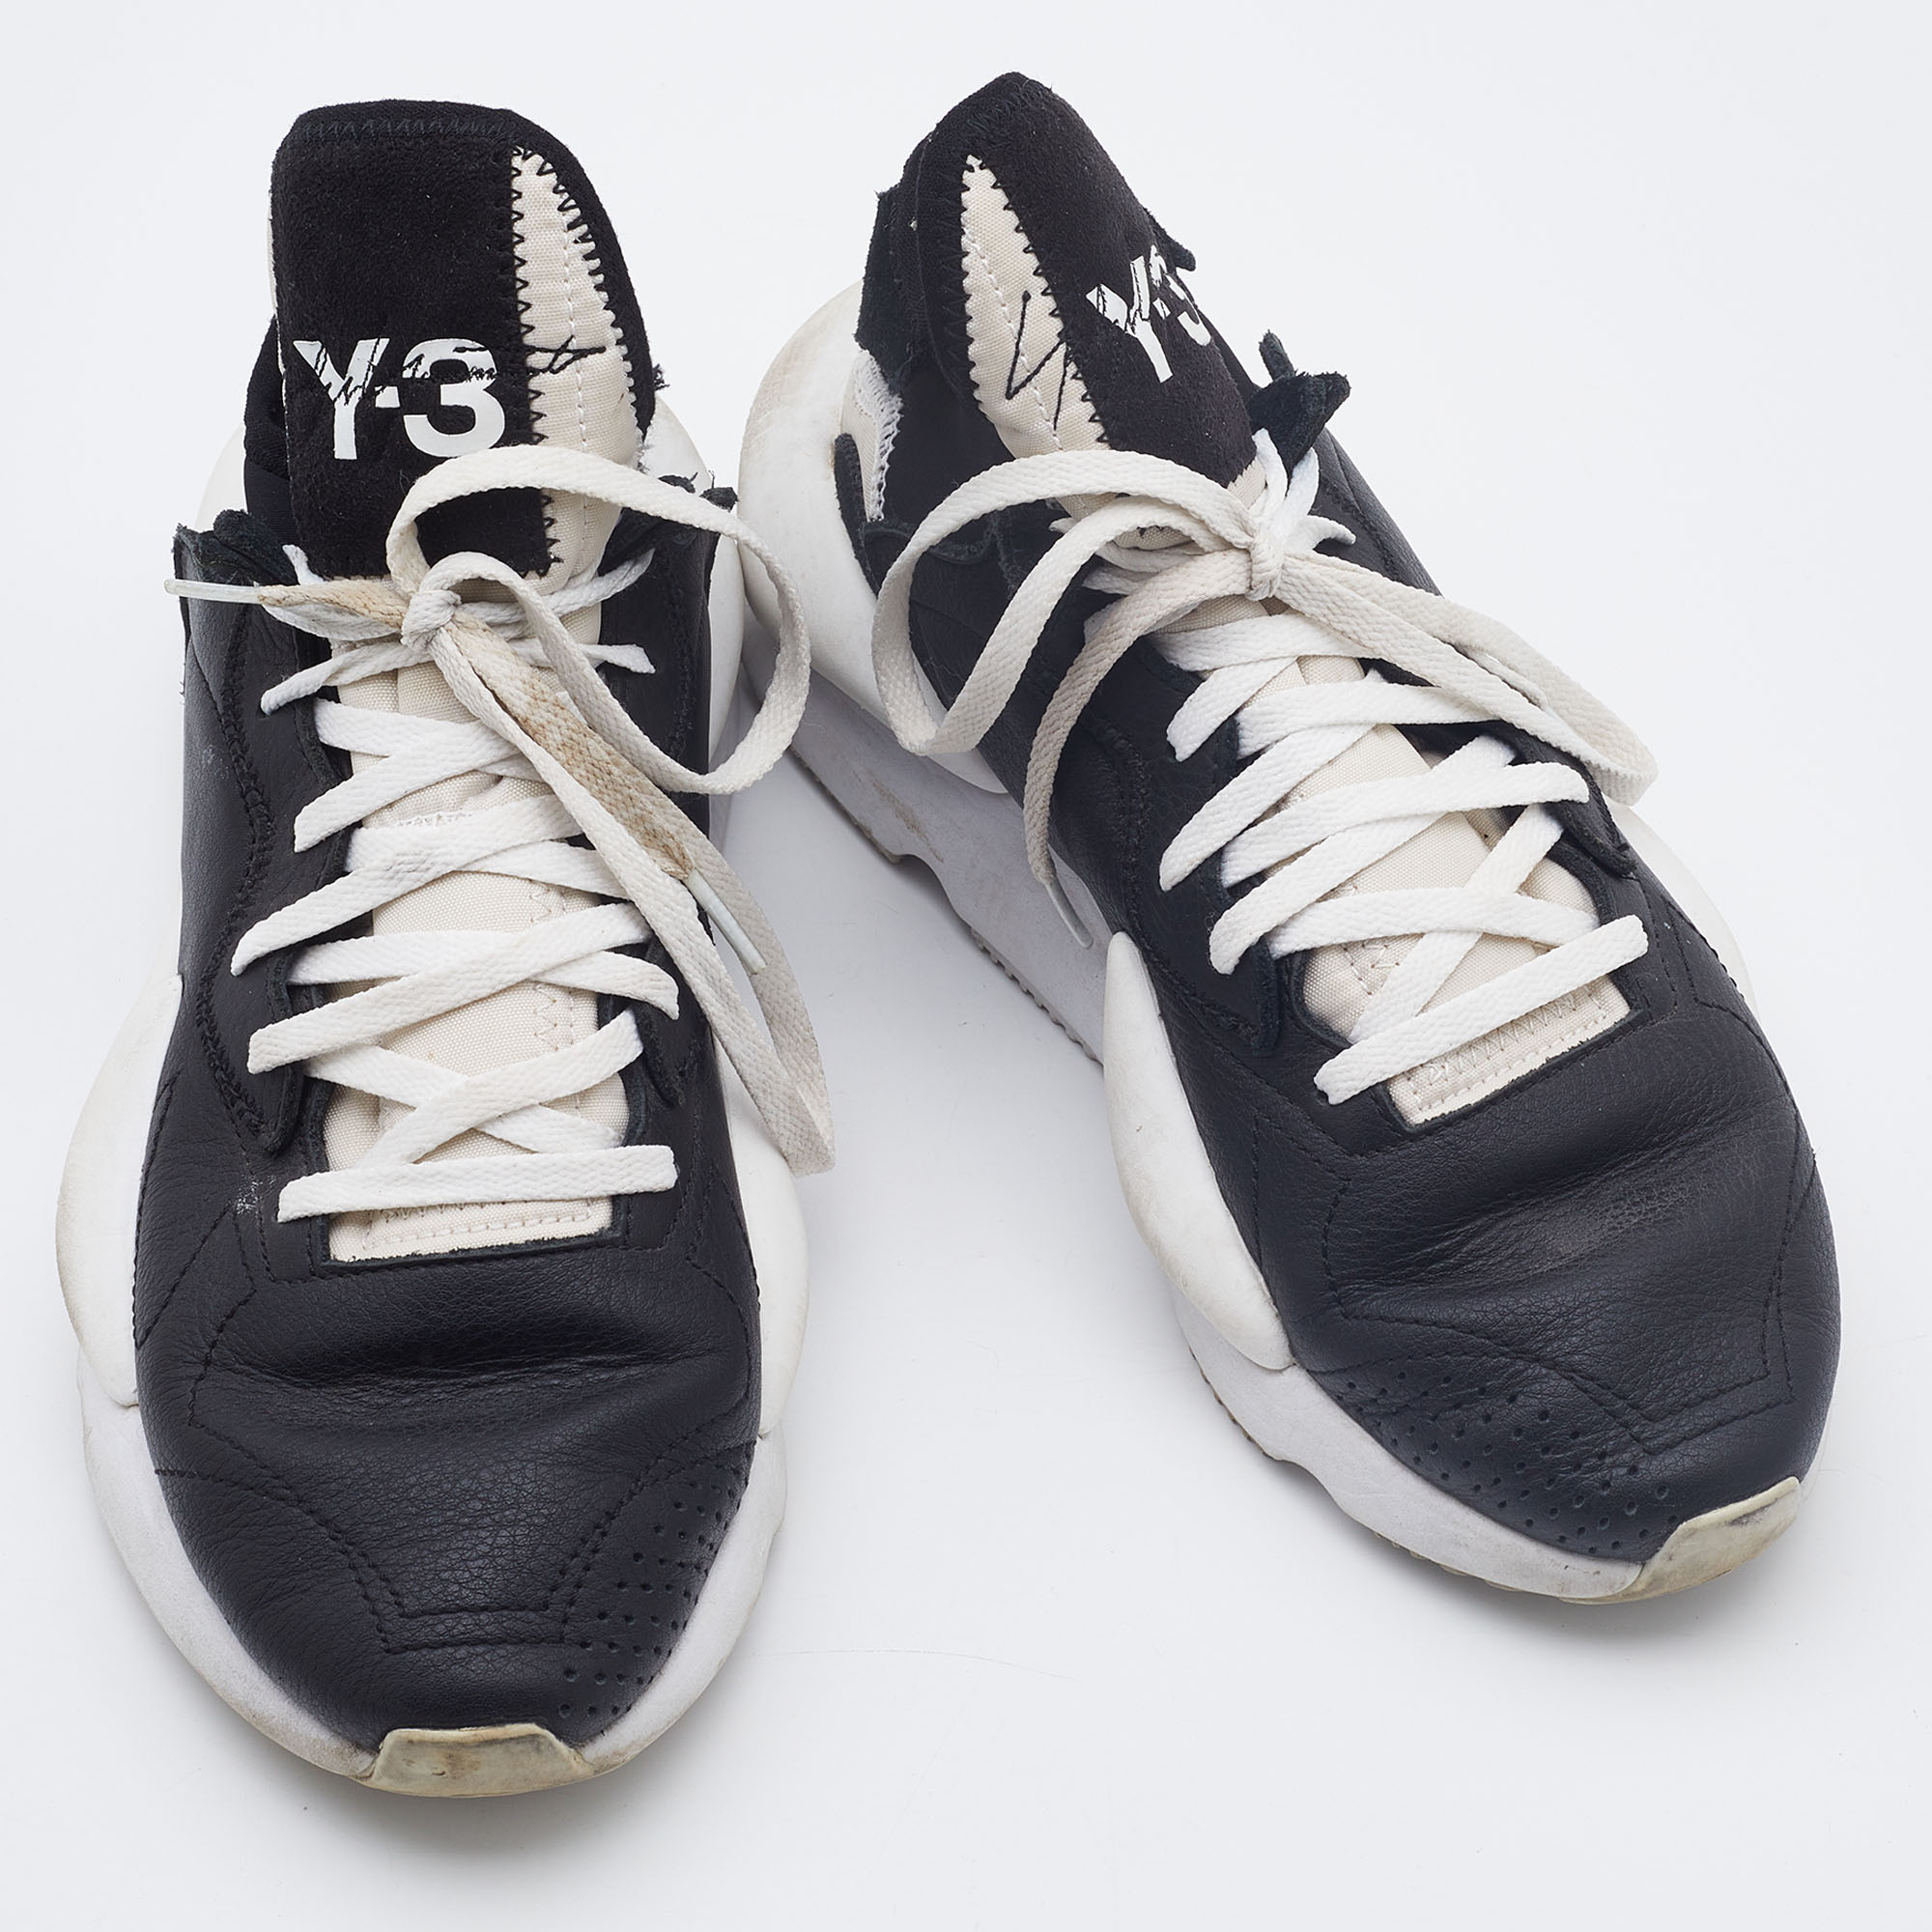 Y-3 Black/White Leather And Fabric Kaiwa Sneakers Size 40